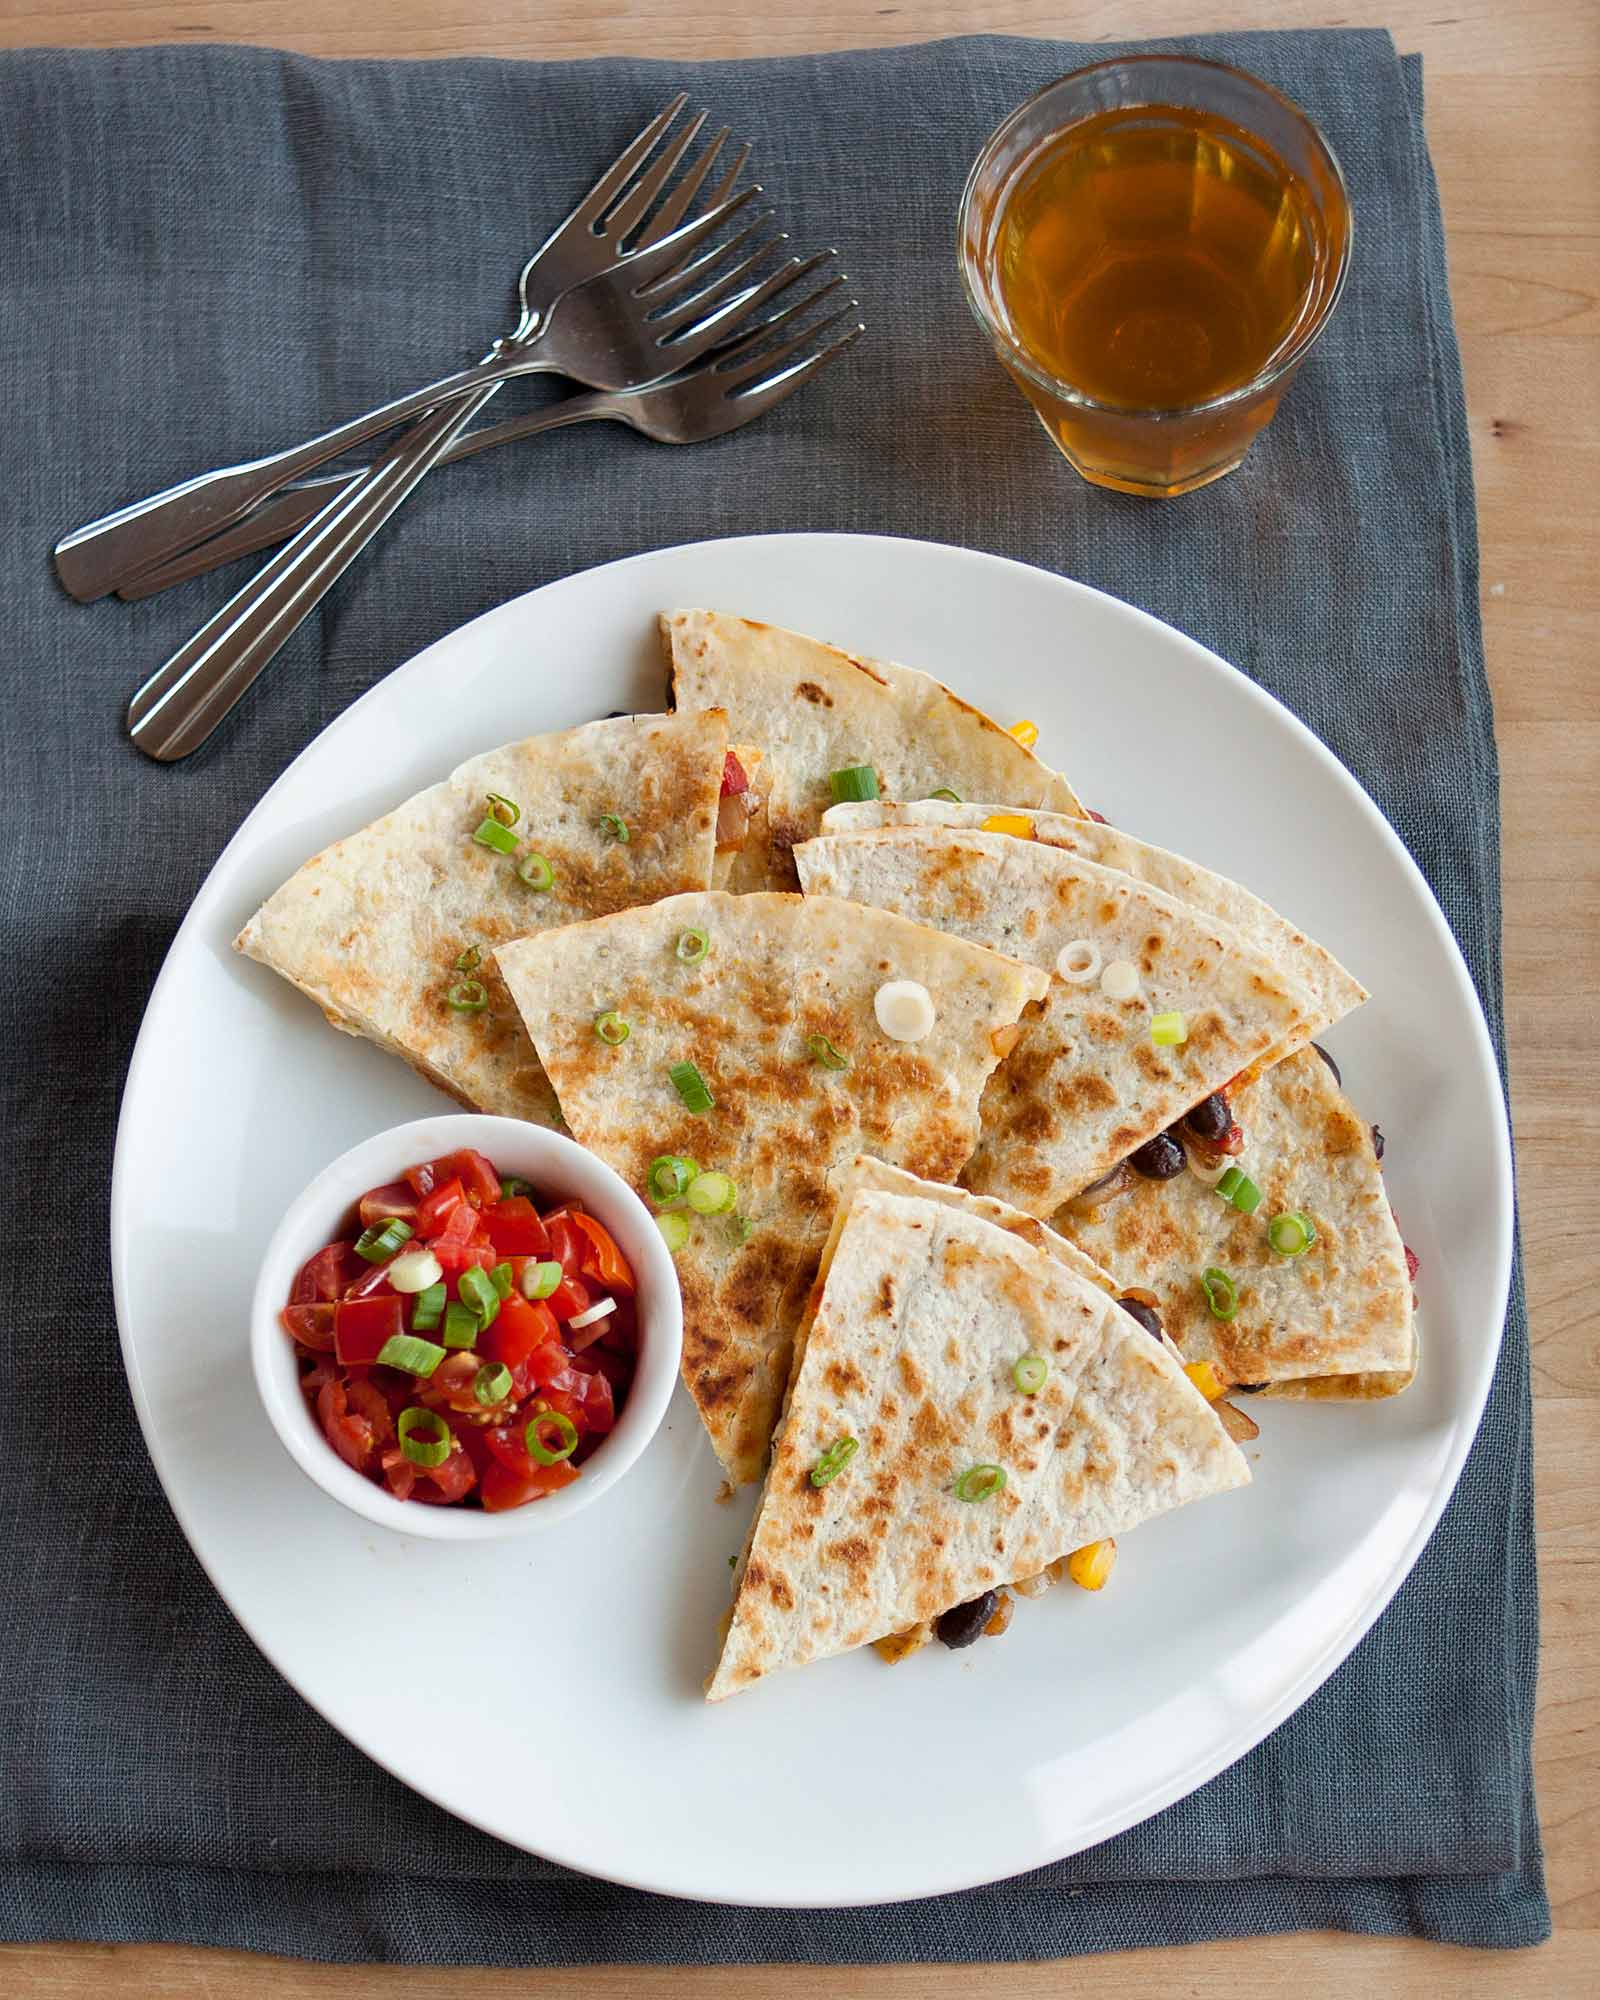 This quesadilla maker will satisfy all your cheesy fixes